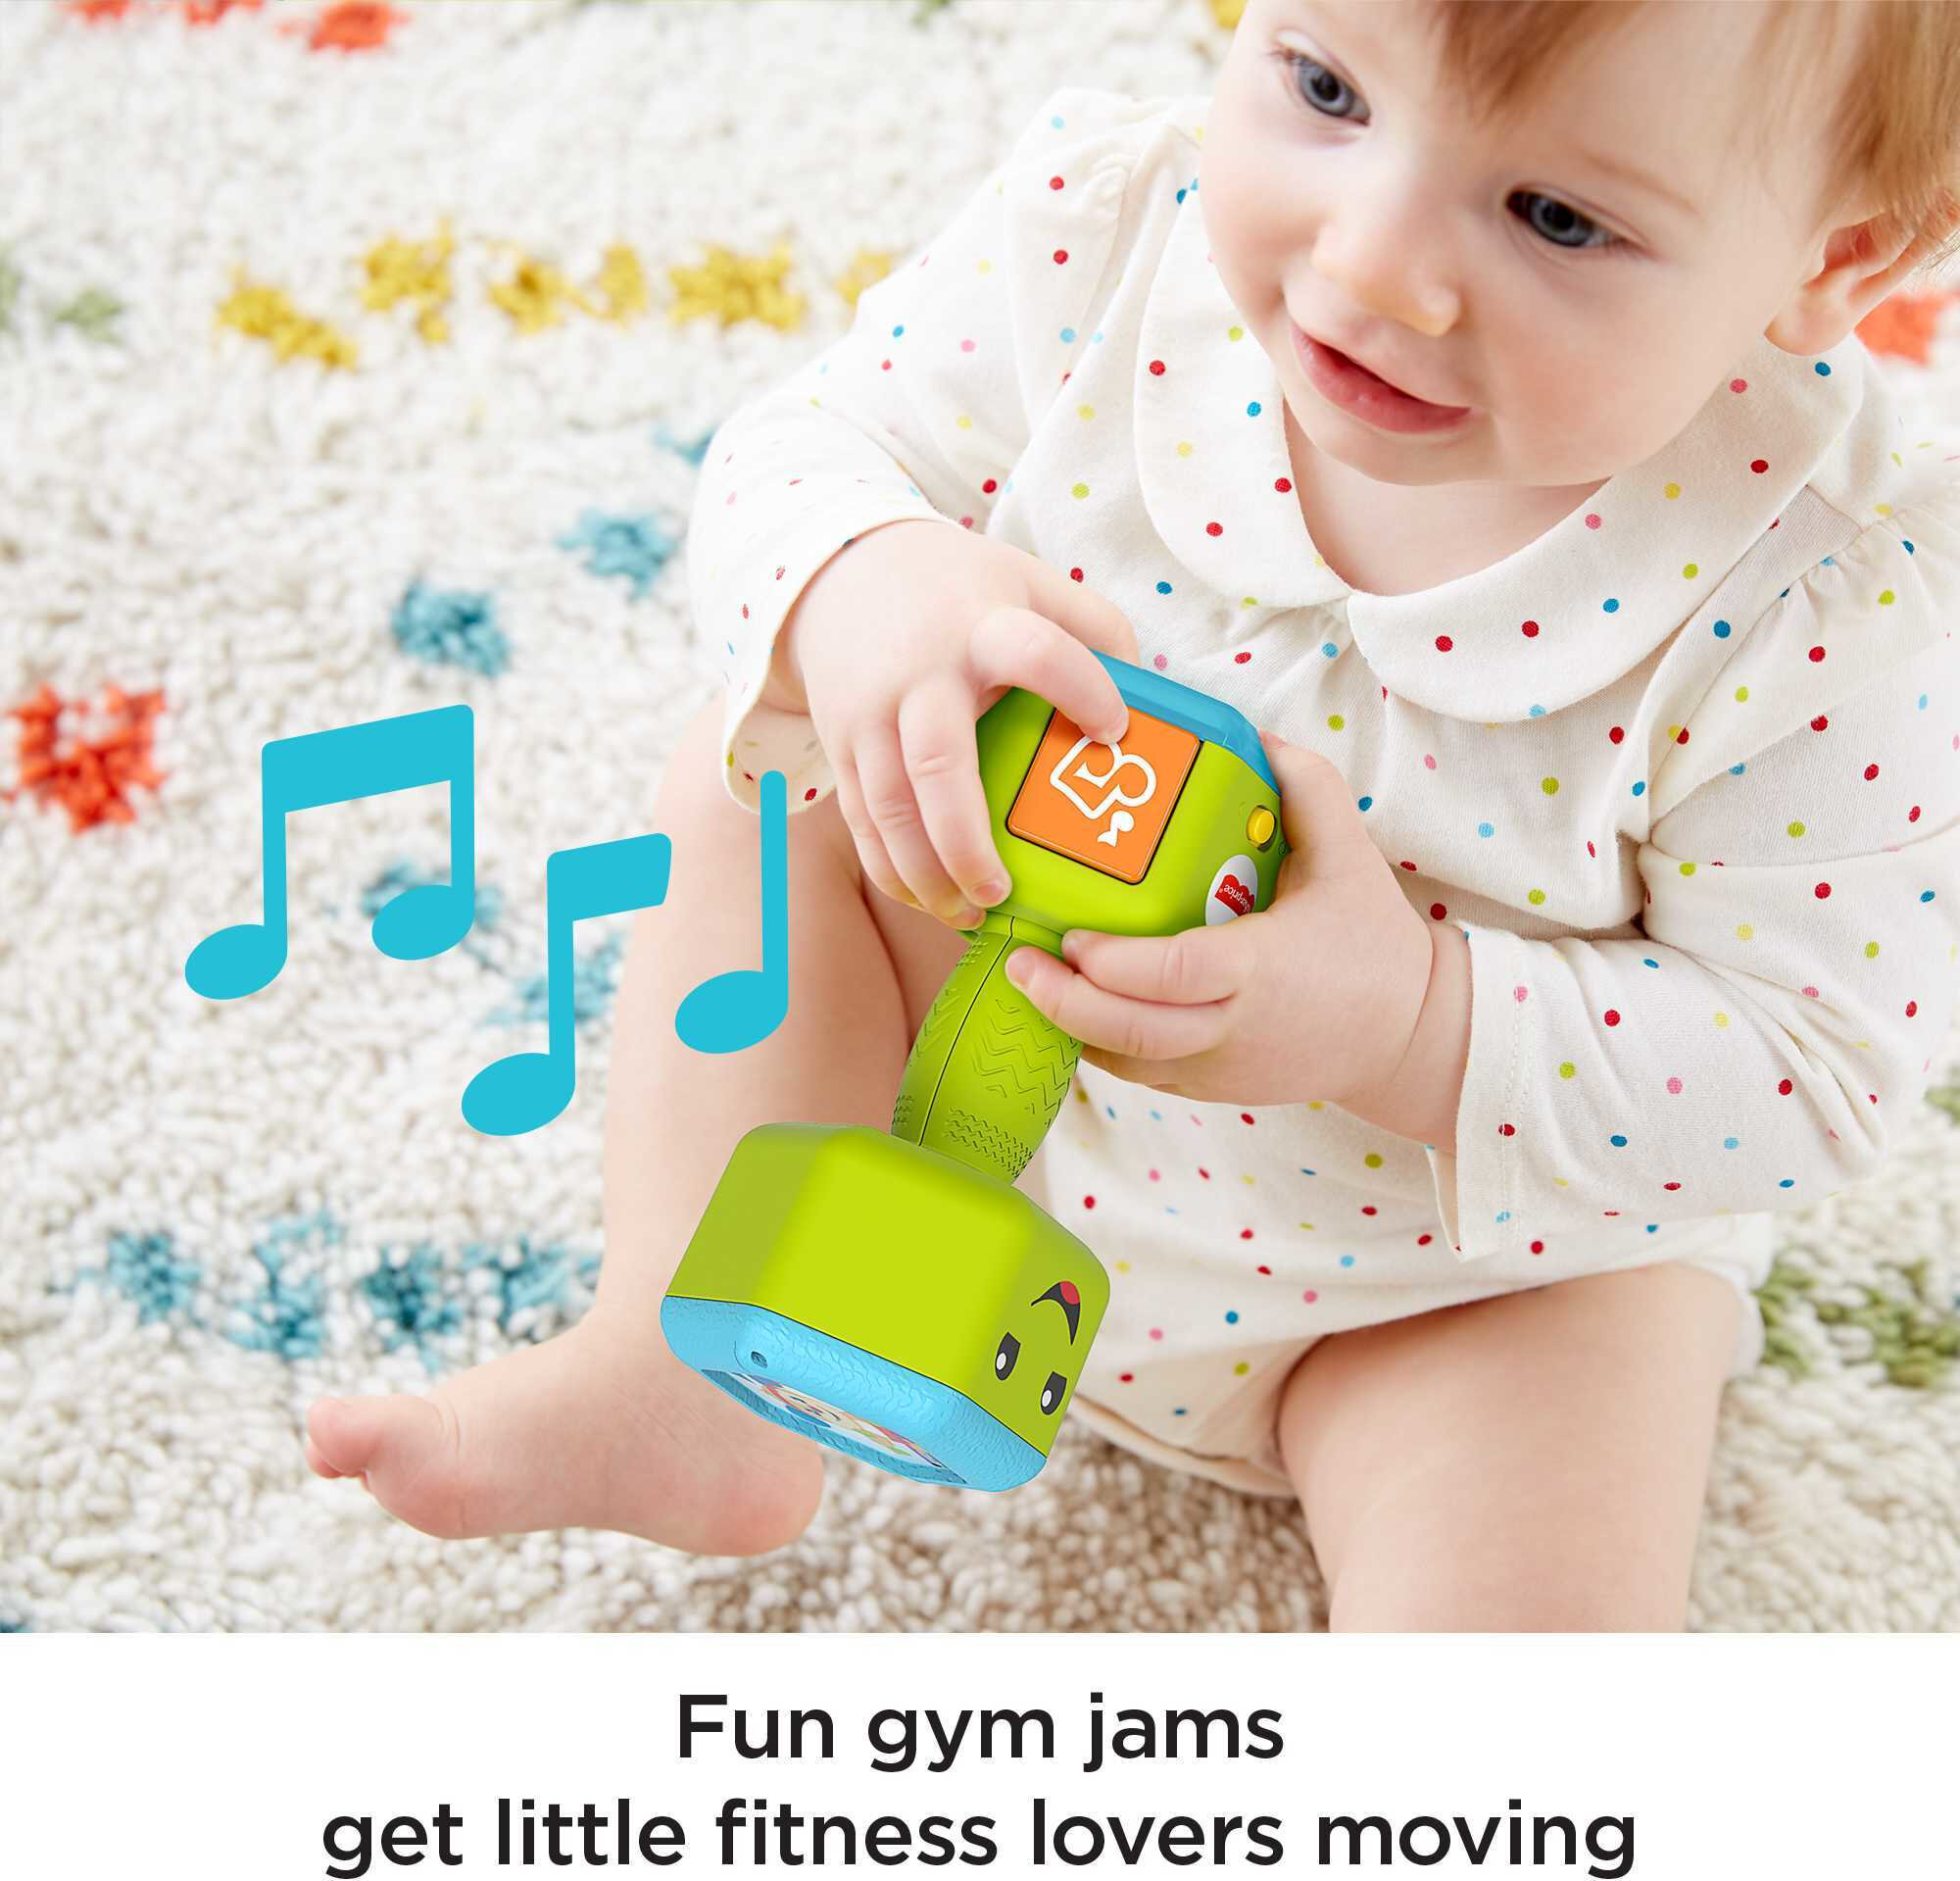 Fisher-Price Laugh & Learn Countin’ Reps Dumbbell Musical Rattle Toy for Infant & Toddler - image 5 of 6